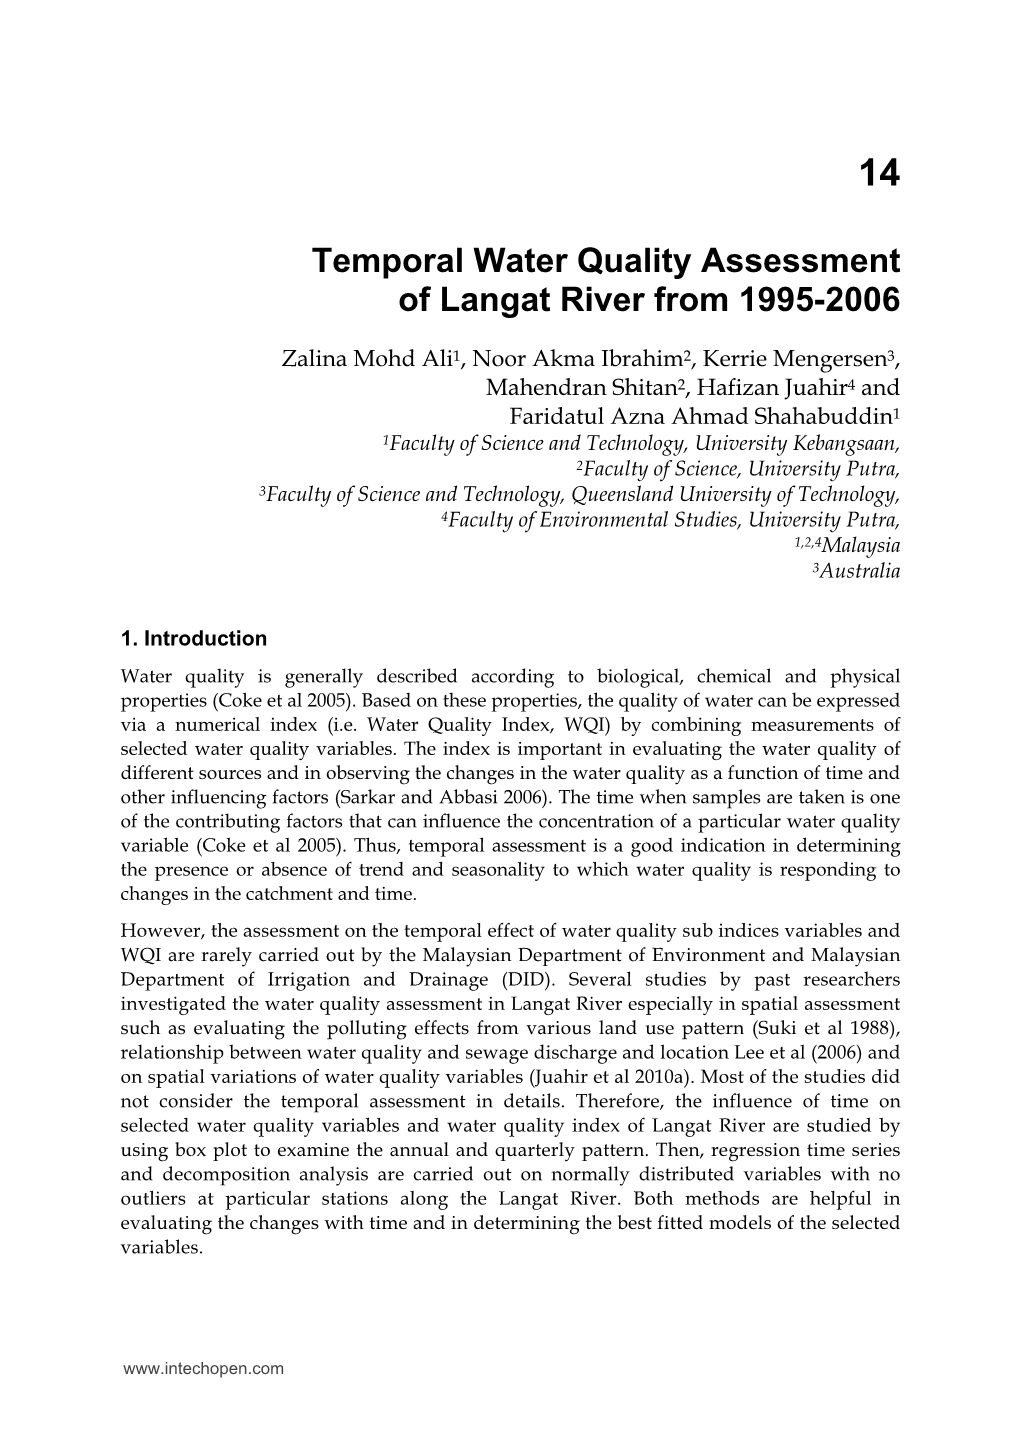 Temporal Water Quality Assessment of Langat River from 1995-2006